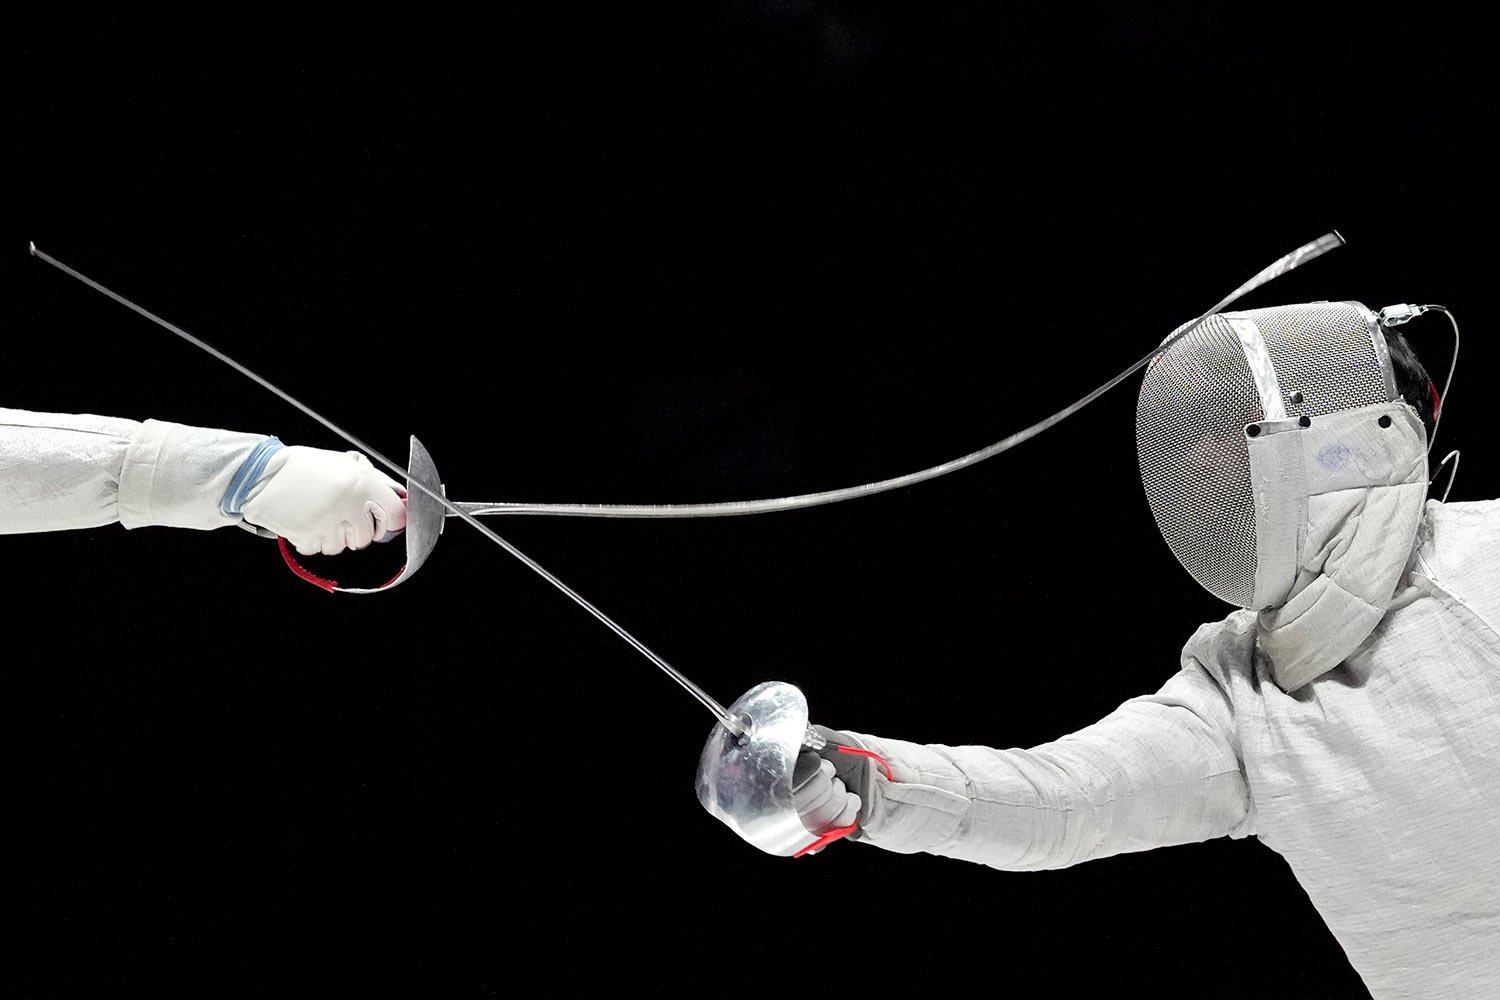  Shen Chenpeng, left, of China, competes against Gu Bongil of South Korea during the men's sabre team finals match of the 19th Asian Games in Hangzhou, China, Thursday, Sept. 28, 2023. (AP Photo/Aaron Favila) 